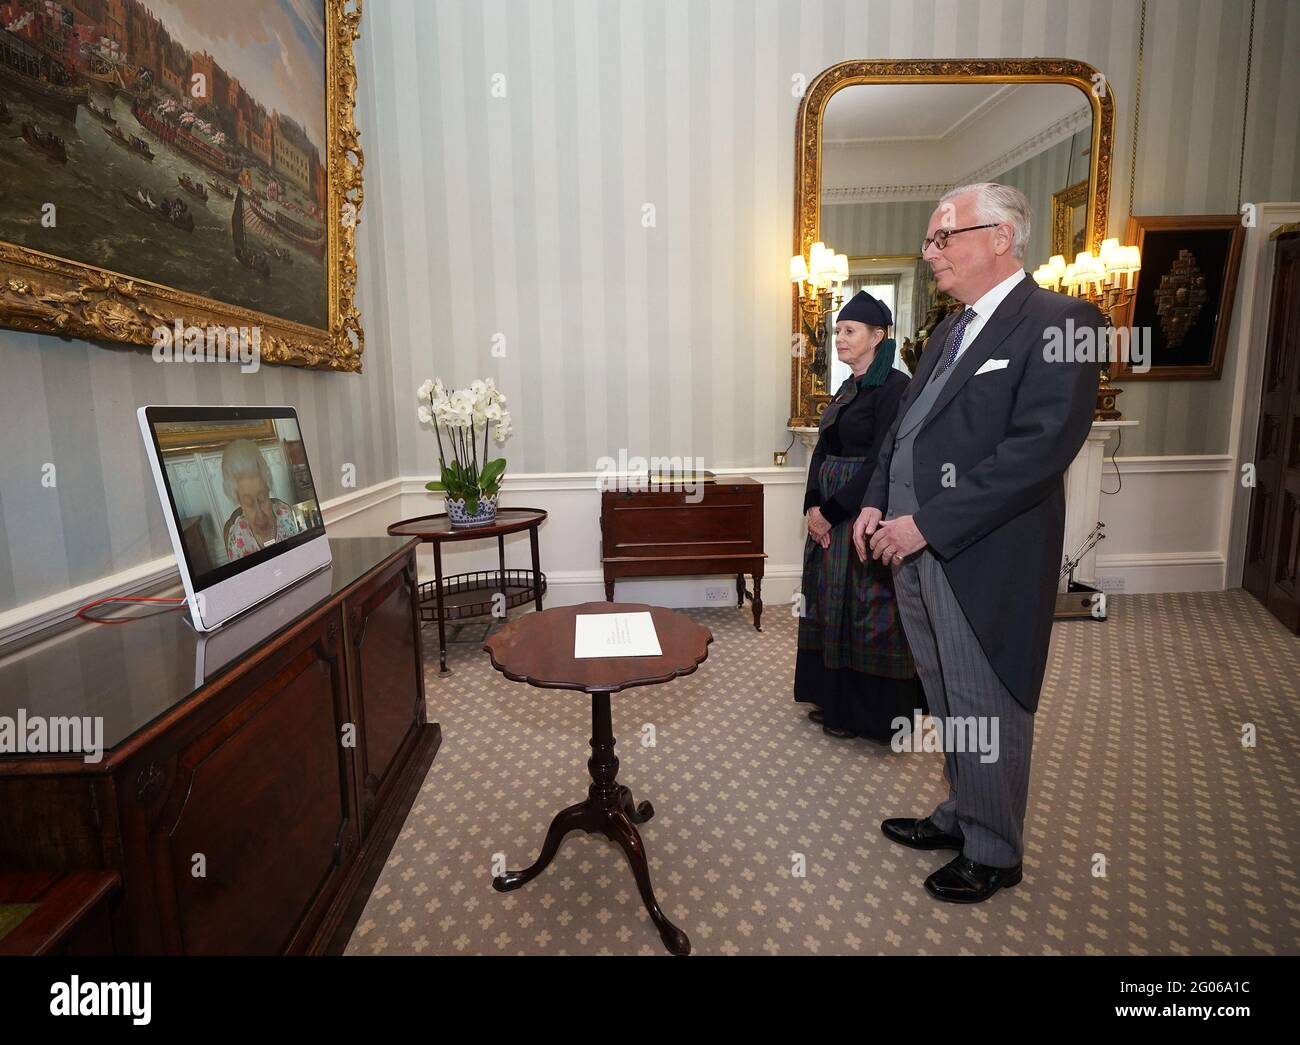 Queen Elizabeth II appears on a screen via videolink from Windsor Castle, where she is in residence, during a virtual audience to receive His Excellency Sturla Sigurjonsson, Ambassador of Iceland, and his wife Elin Jonsdottir, who attended Buckingham Palace, London. Picture date: Tuesday June 1, 2021. Stock Photo